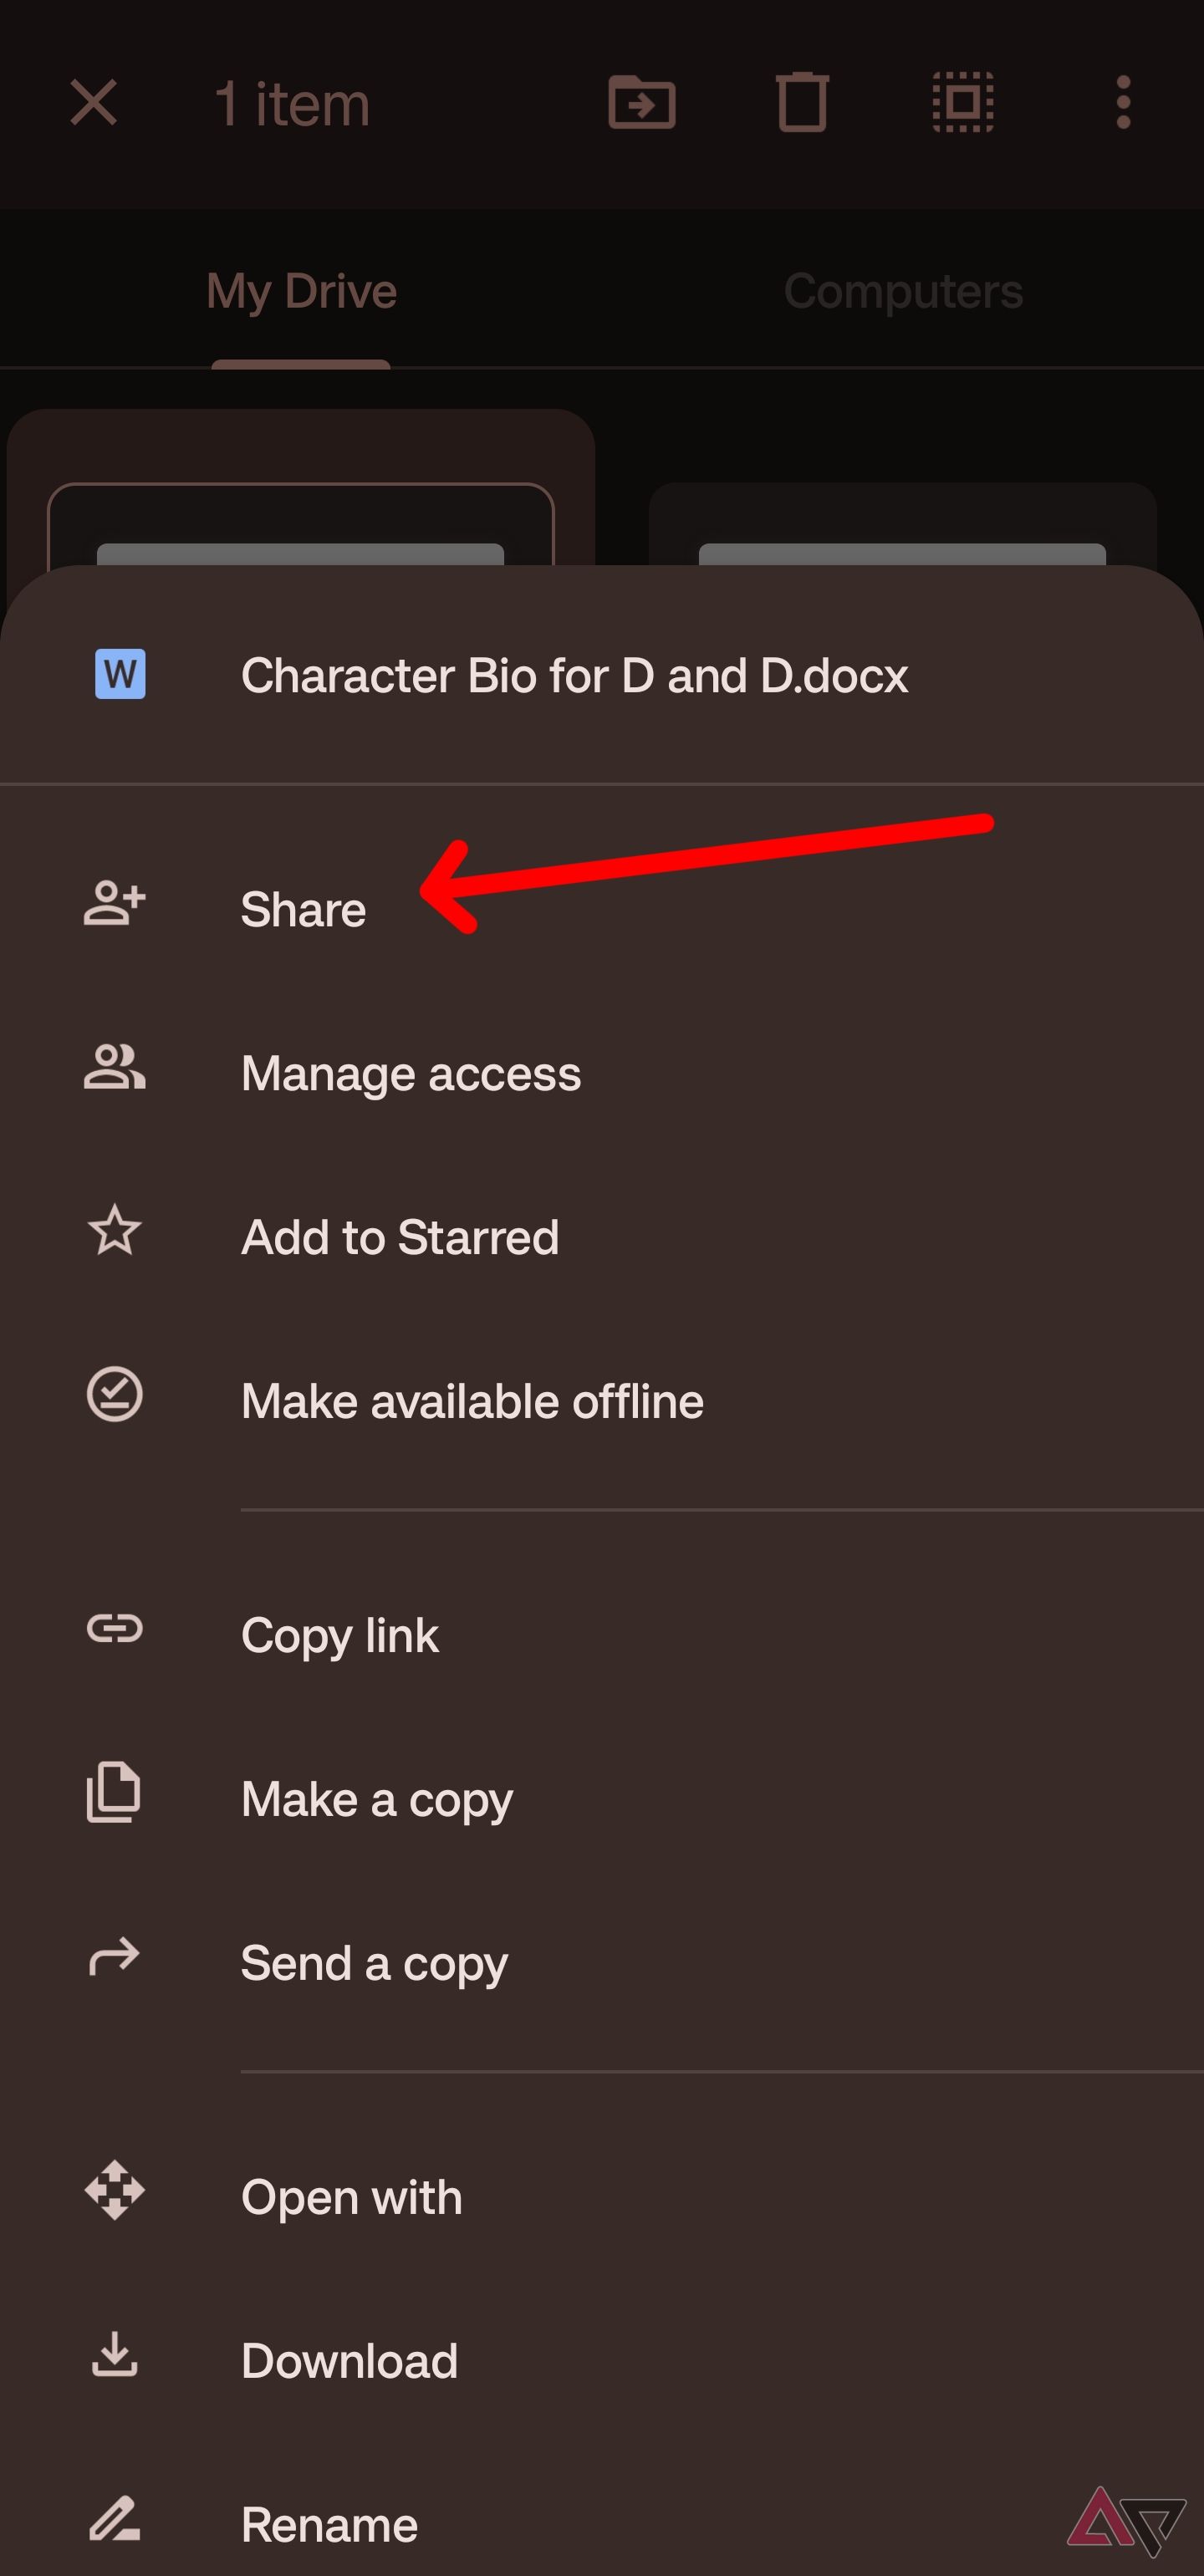 Select share to share your files through the mobile Drive app.